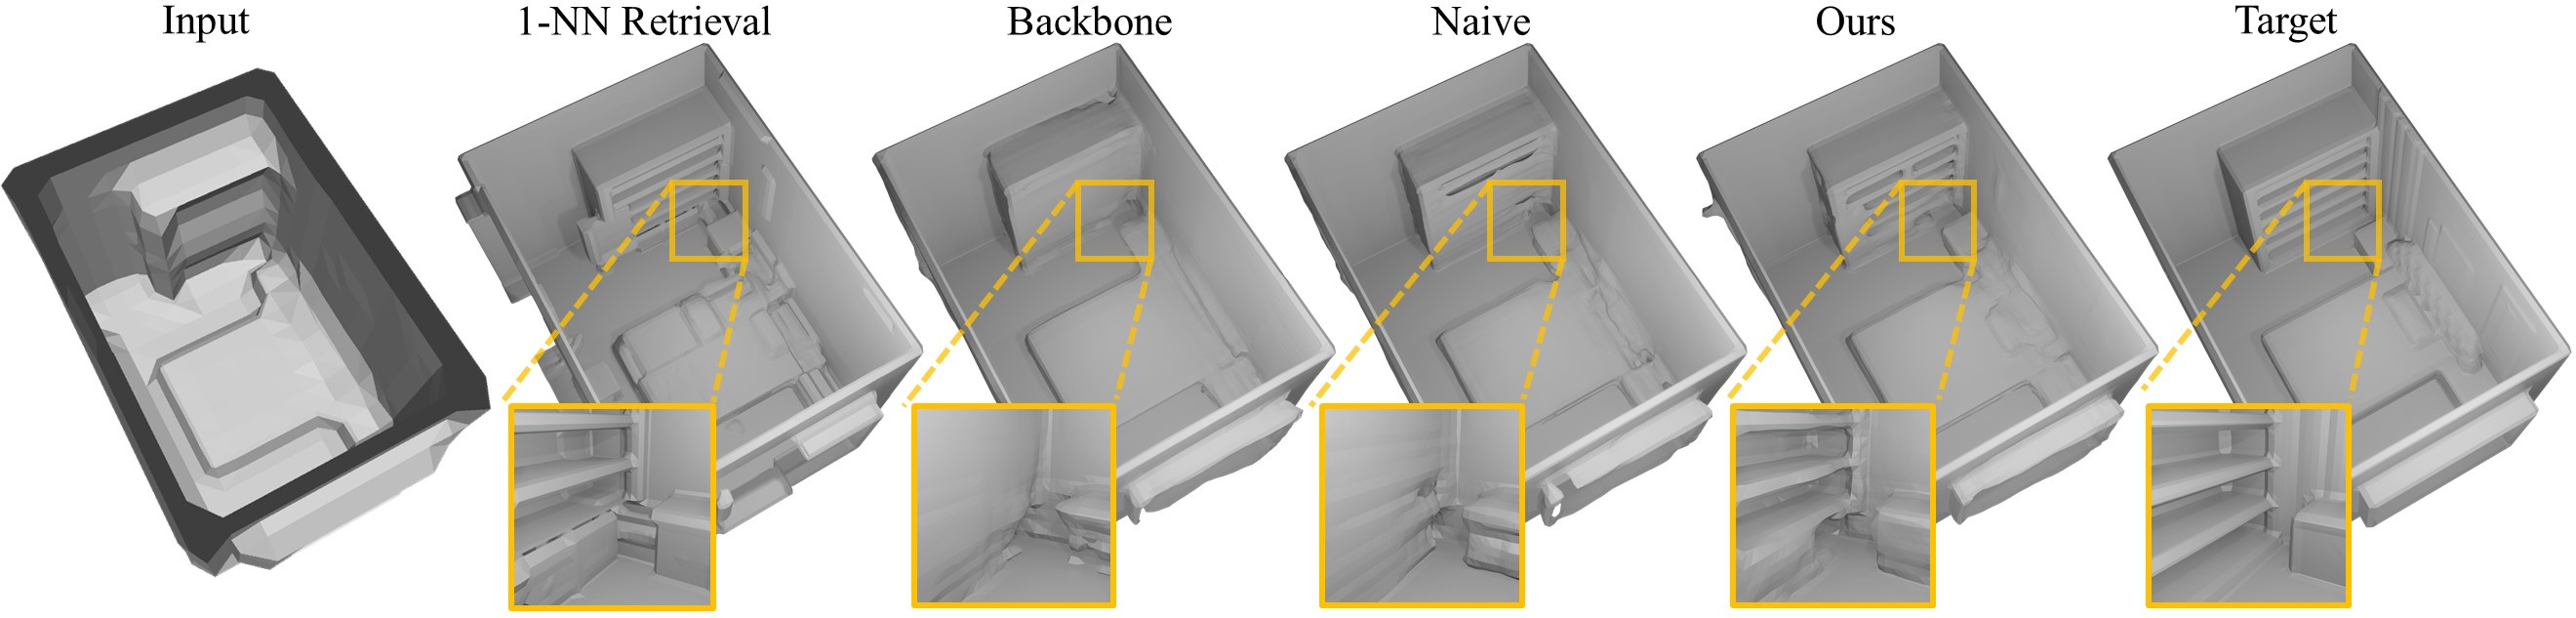 Effect of various components|Qualitative evaluation of our method (<i>Ours</i>) in comparison to 1<sup>st</sup> nearest neighbor retrieval (<i>1-NN Retrieval</i>), our refinement network without retrievals (<i>Backbone</i>) and naive fusion of retrieved approximations during refinement (<i>Naive</i>).